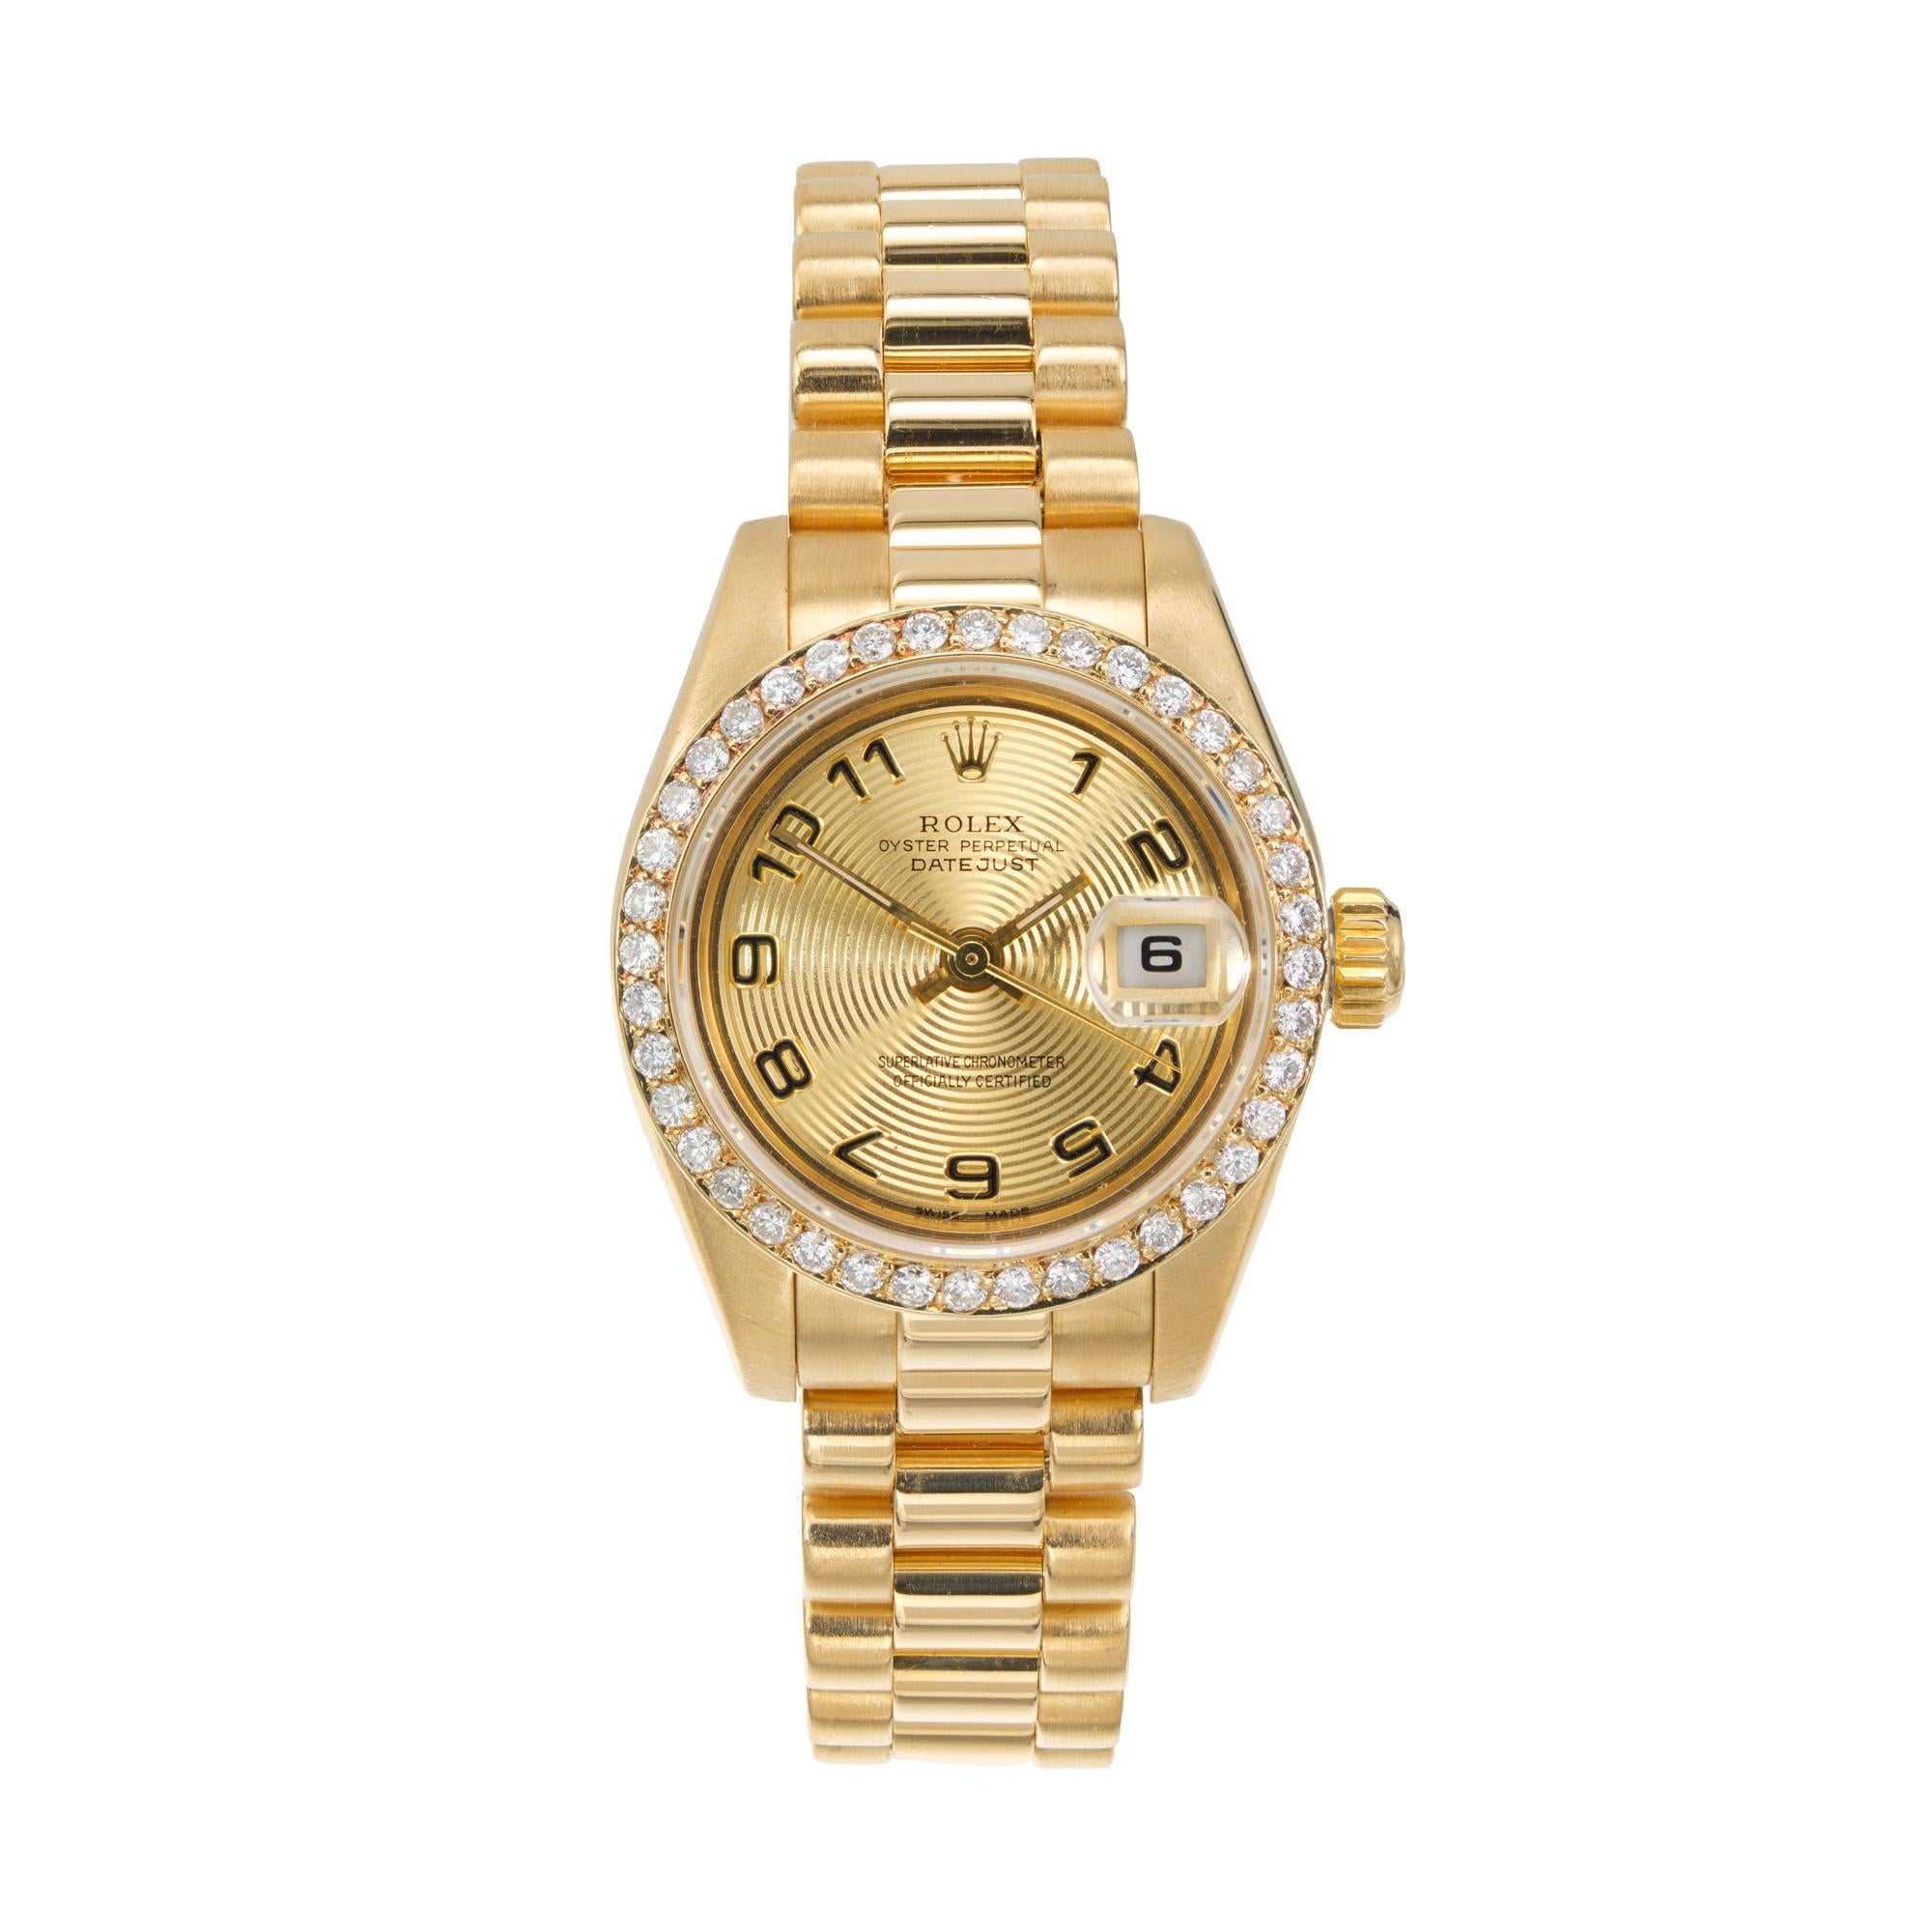 Rolex Ladies President Date Just Turntable Dial Diamond Dial Gold Wristwatch For Sale